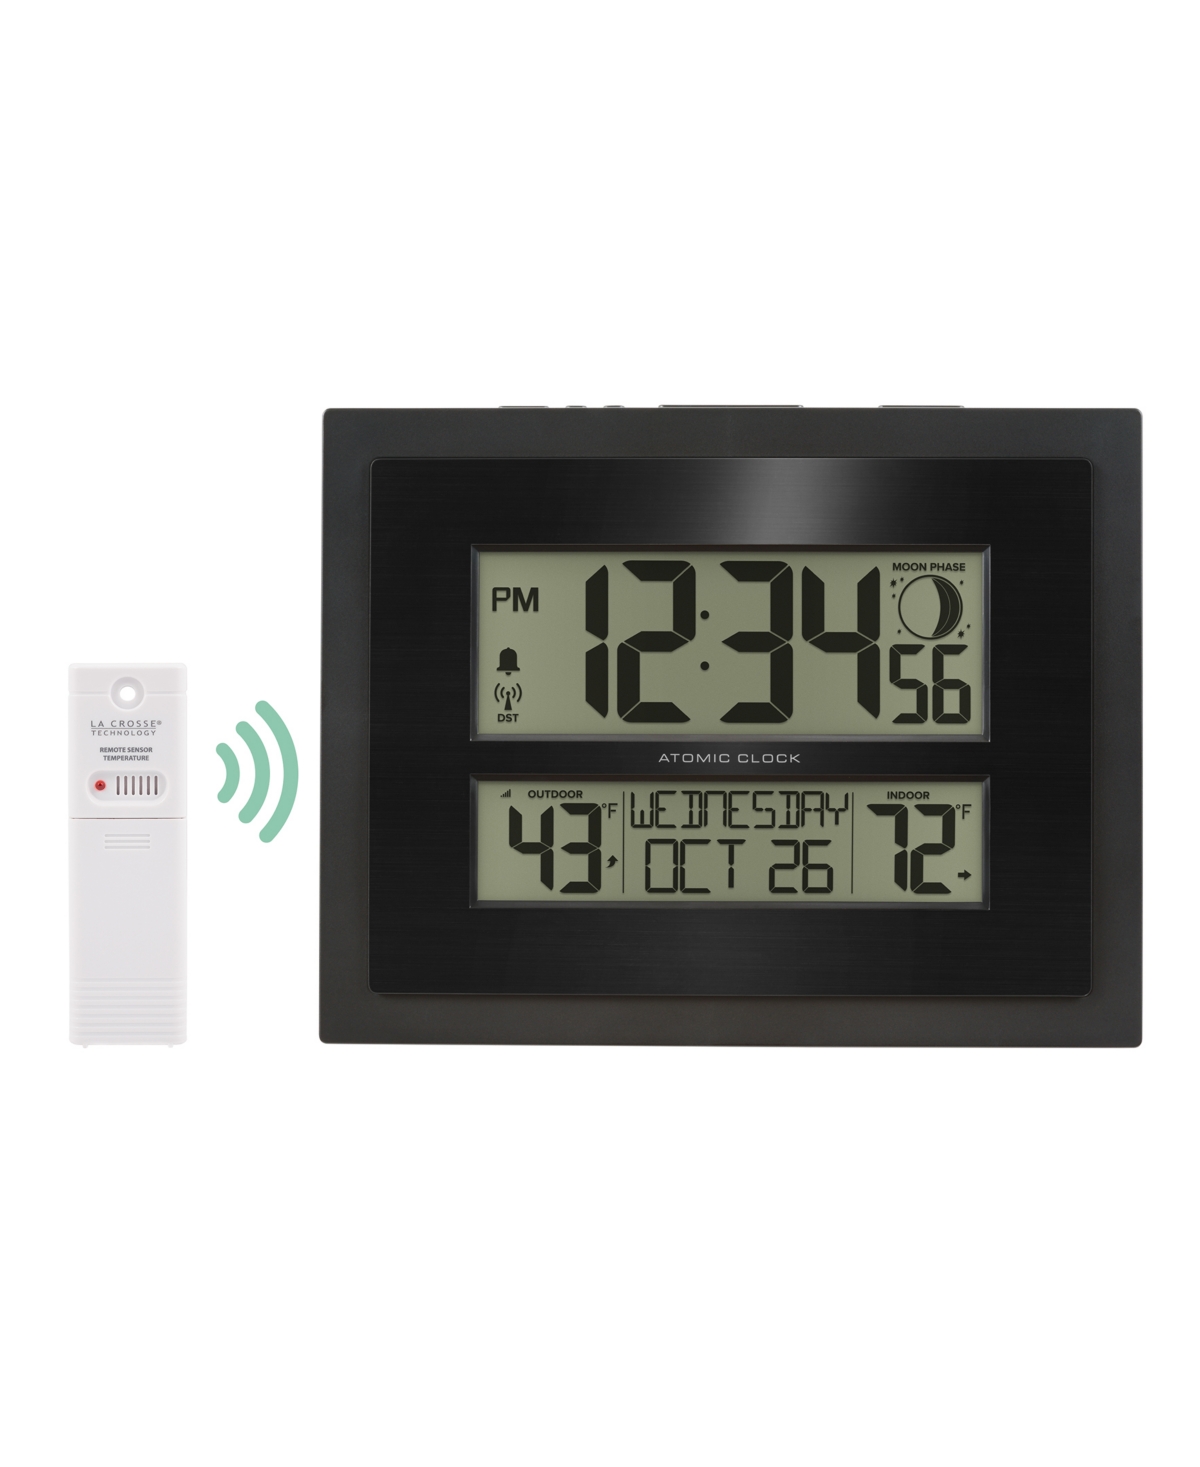 La Crosse Technology 513-75624-int Digital Atomic Clock With Outdoor Temperature With Moon Phase In Black